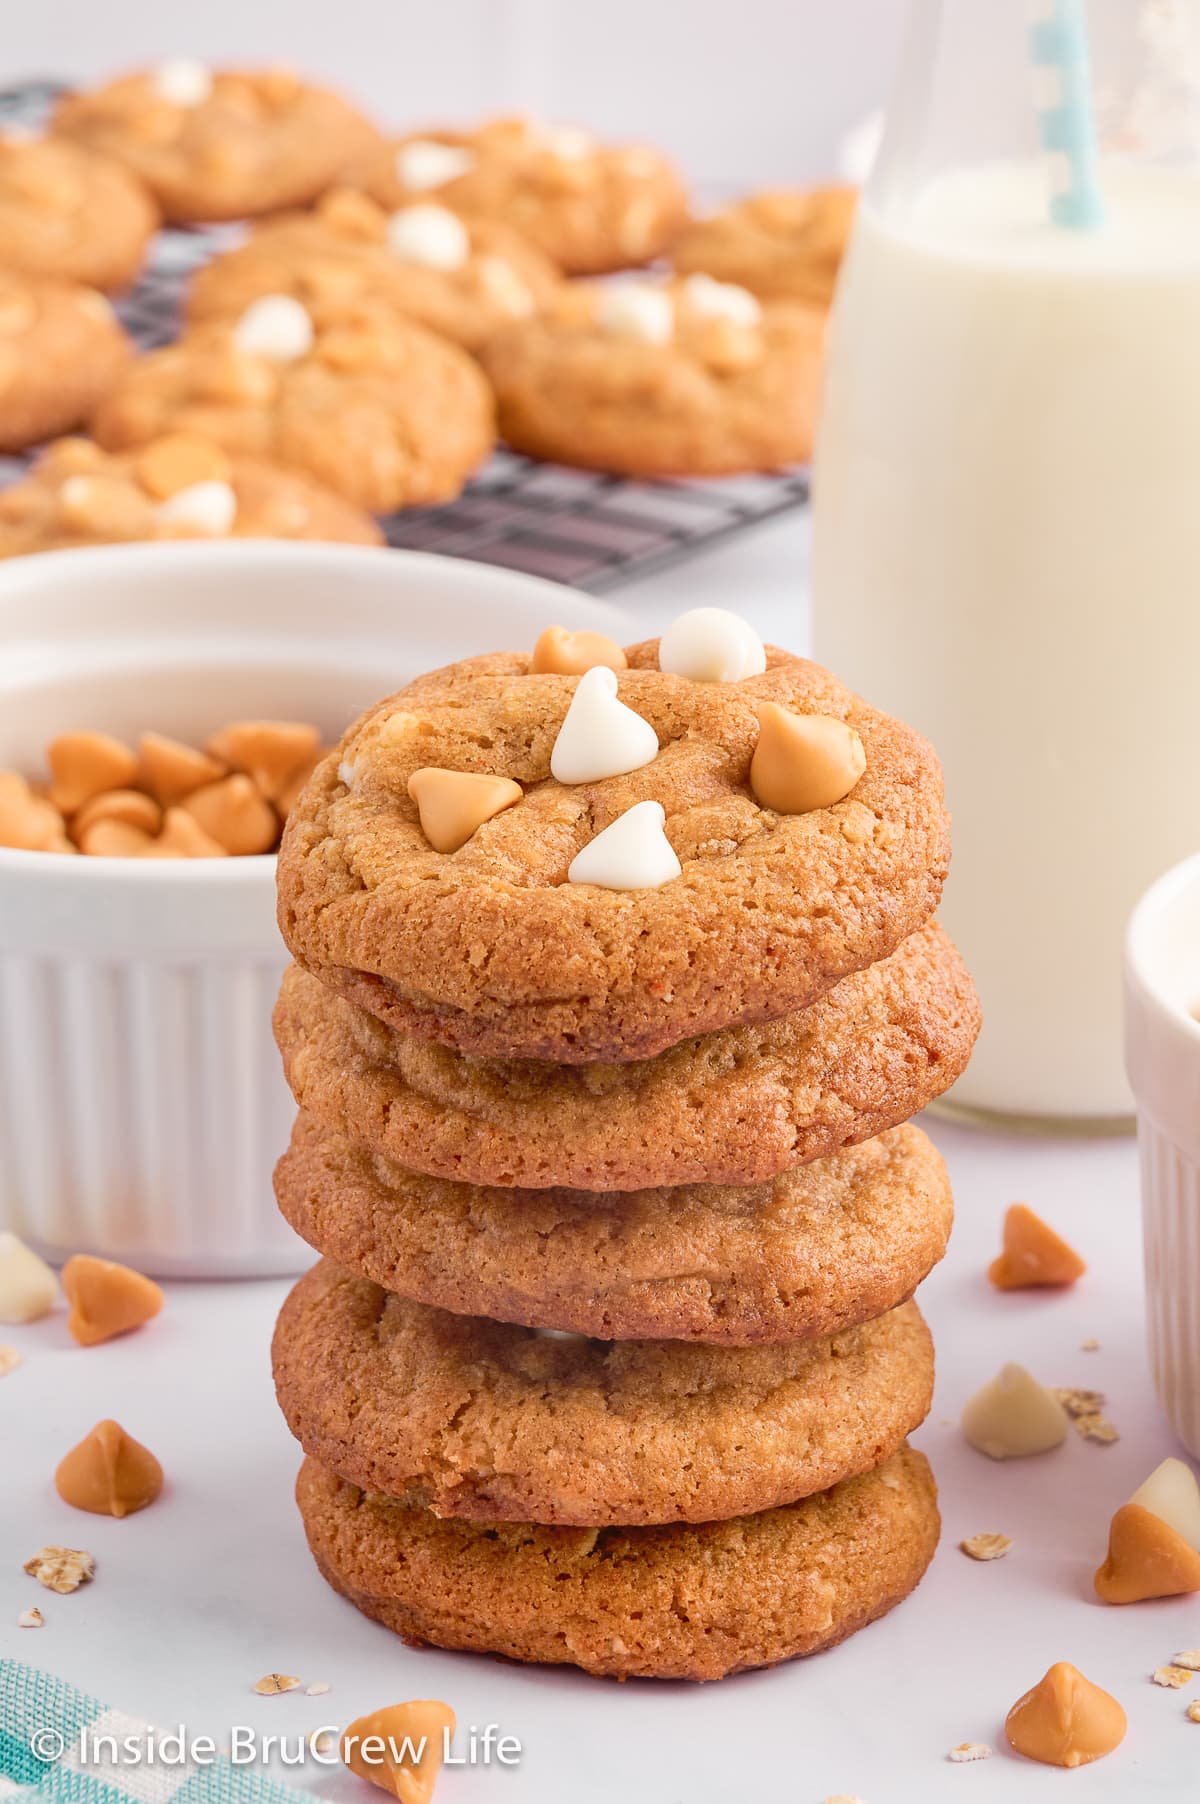 A stack of cookies by a glass cup of milk.